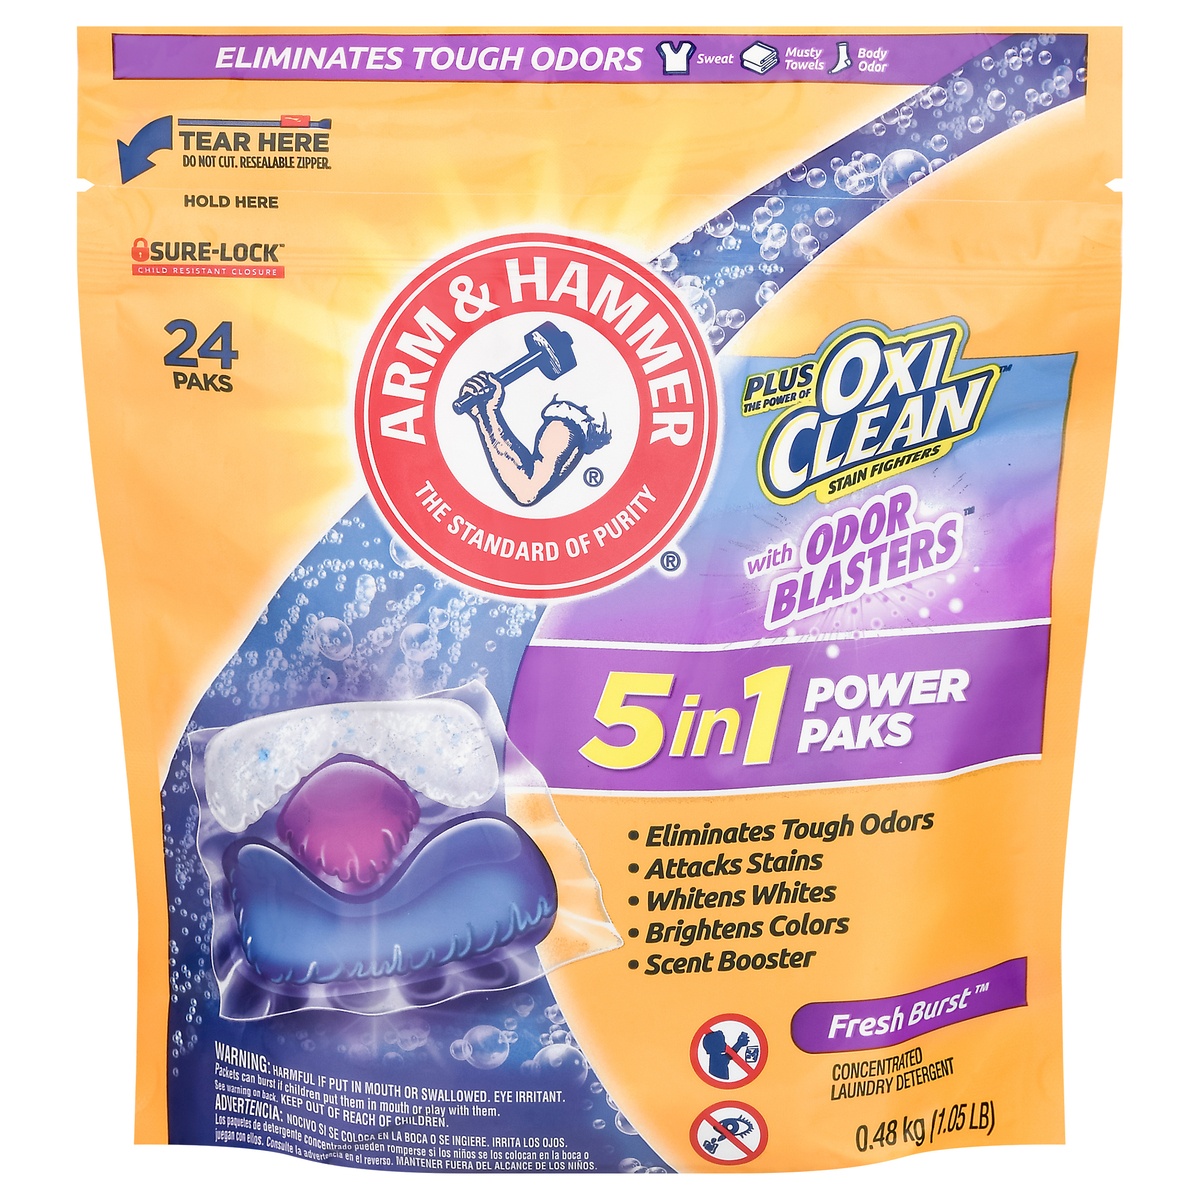 slide 1 of 1, ARM & HAMMER Oxi Clean with Odor Blasters 3-in-1 Power Paks, 24 ct